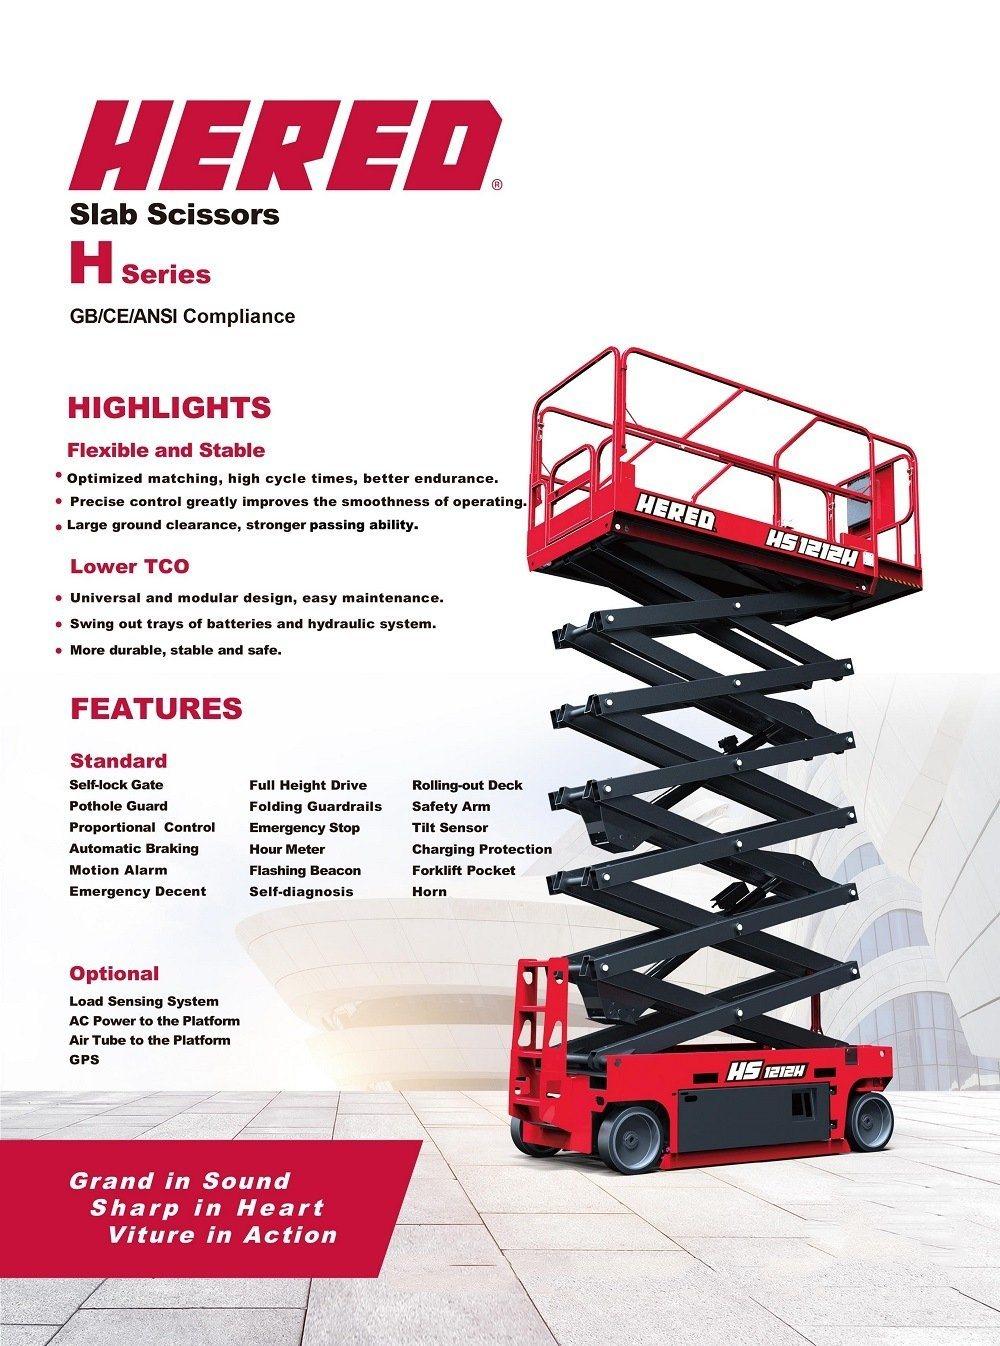 New Type of Hydraulic Lift Construction Lift Special Offer Scissors Lift